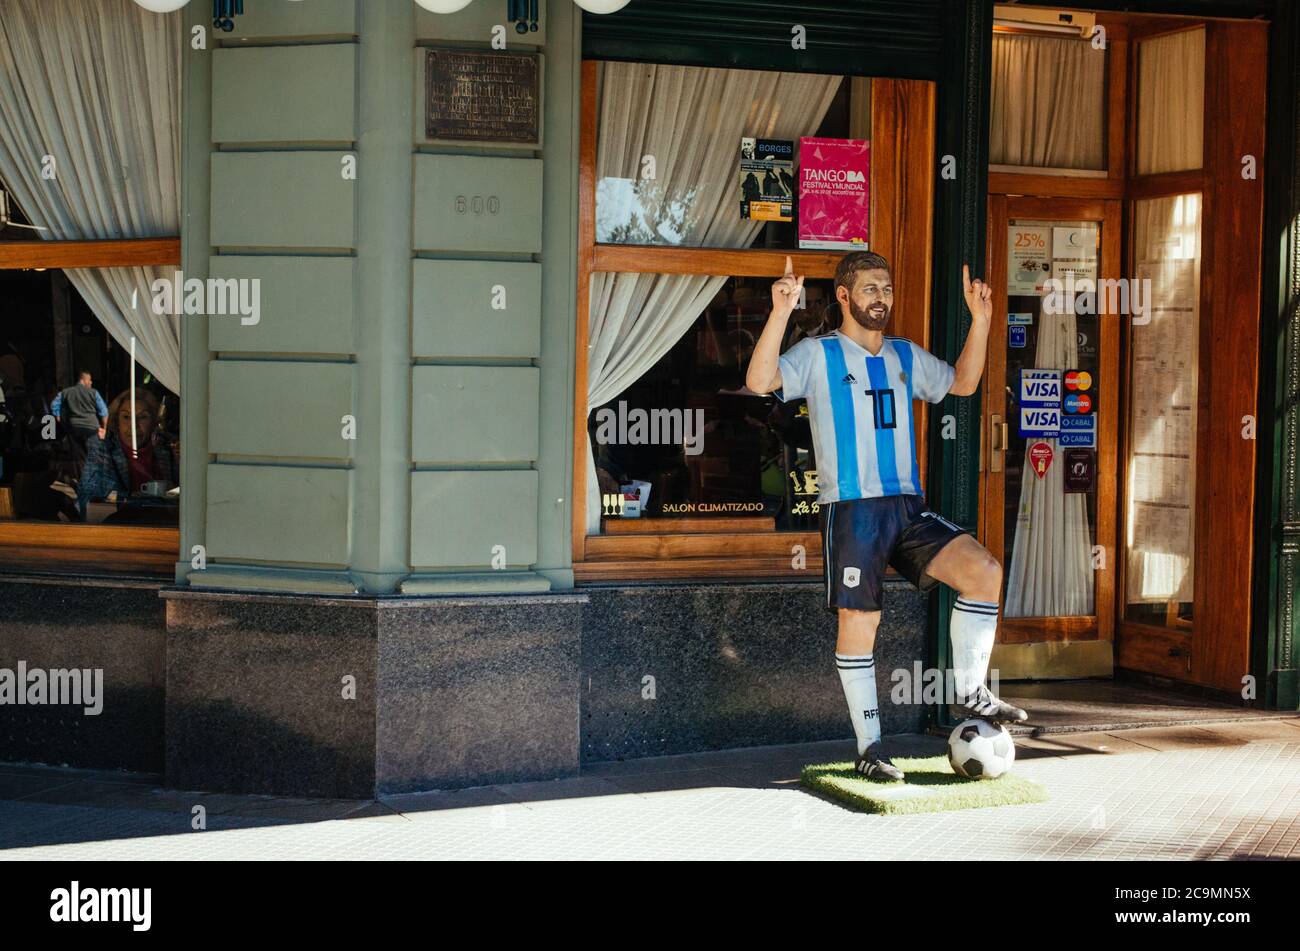 Recoleta, Buenos Aires, Argentina - September 4, 2018: A Lionel Messi statue, a famous argentinian football player, in front of a restaurant. Stock Photo